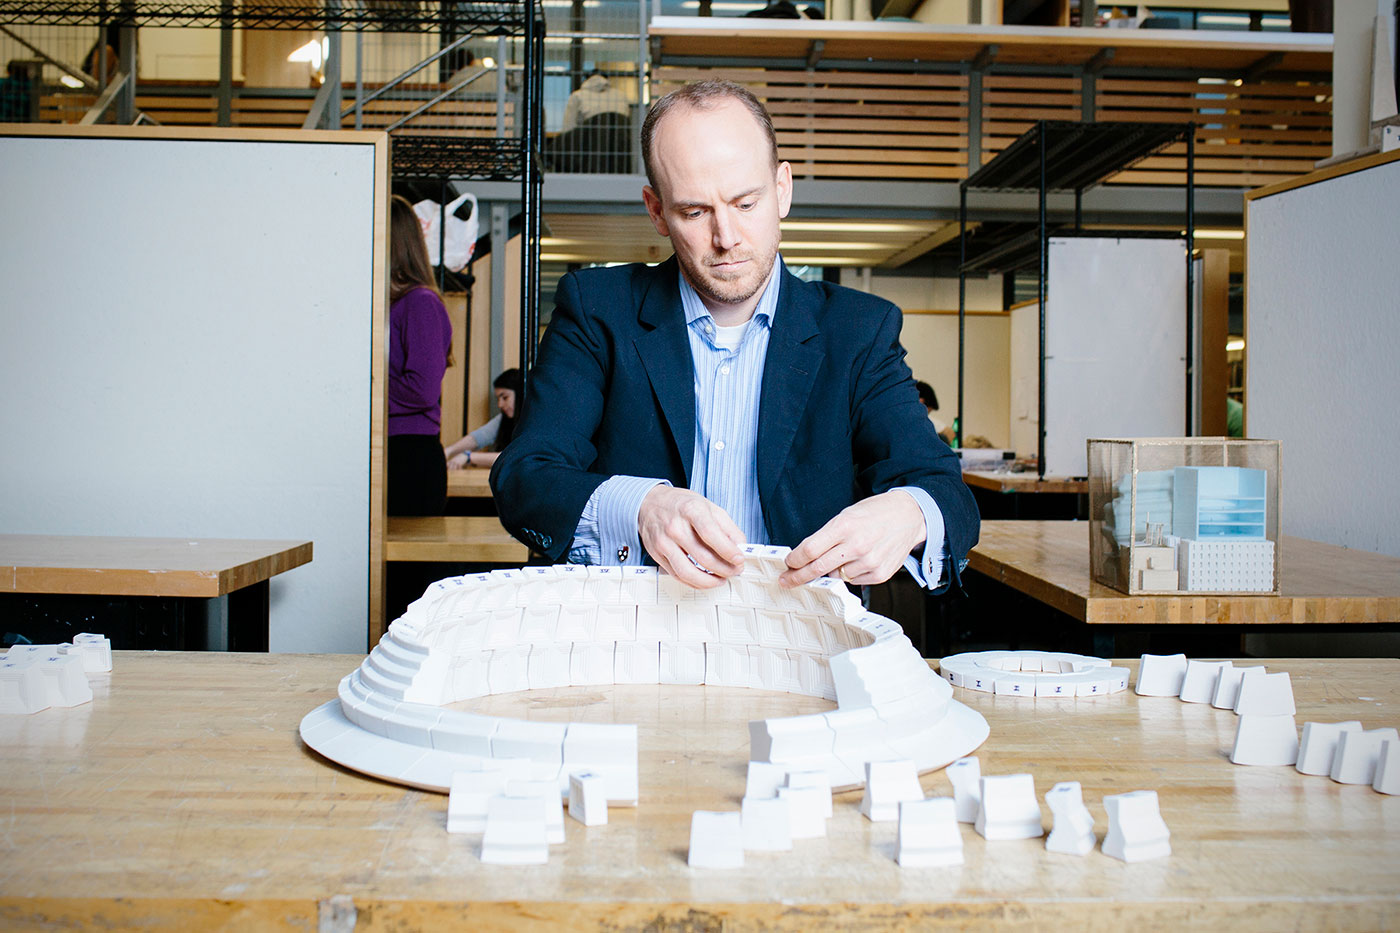 Man assembles a large architectural model on a table inside a classroom